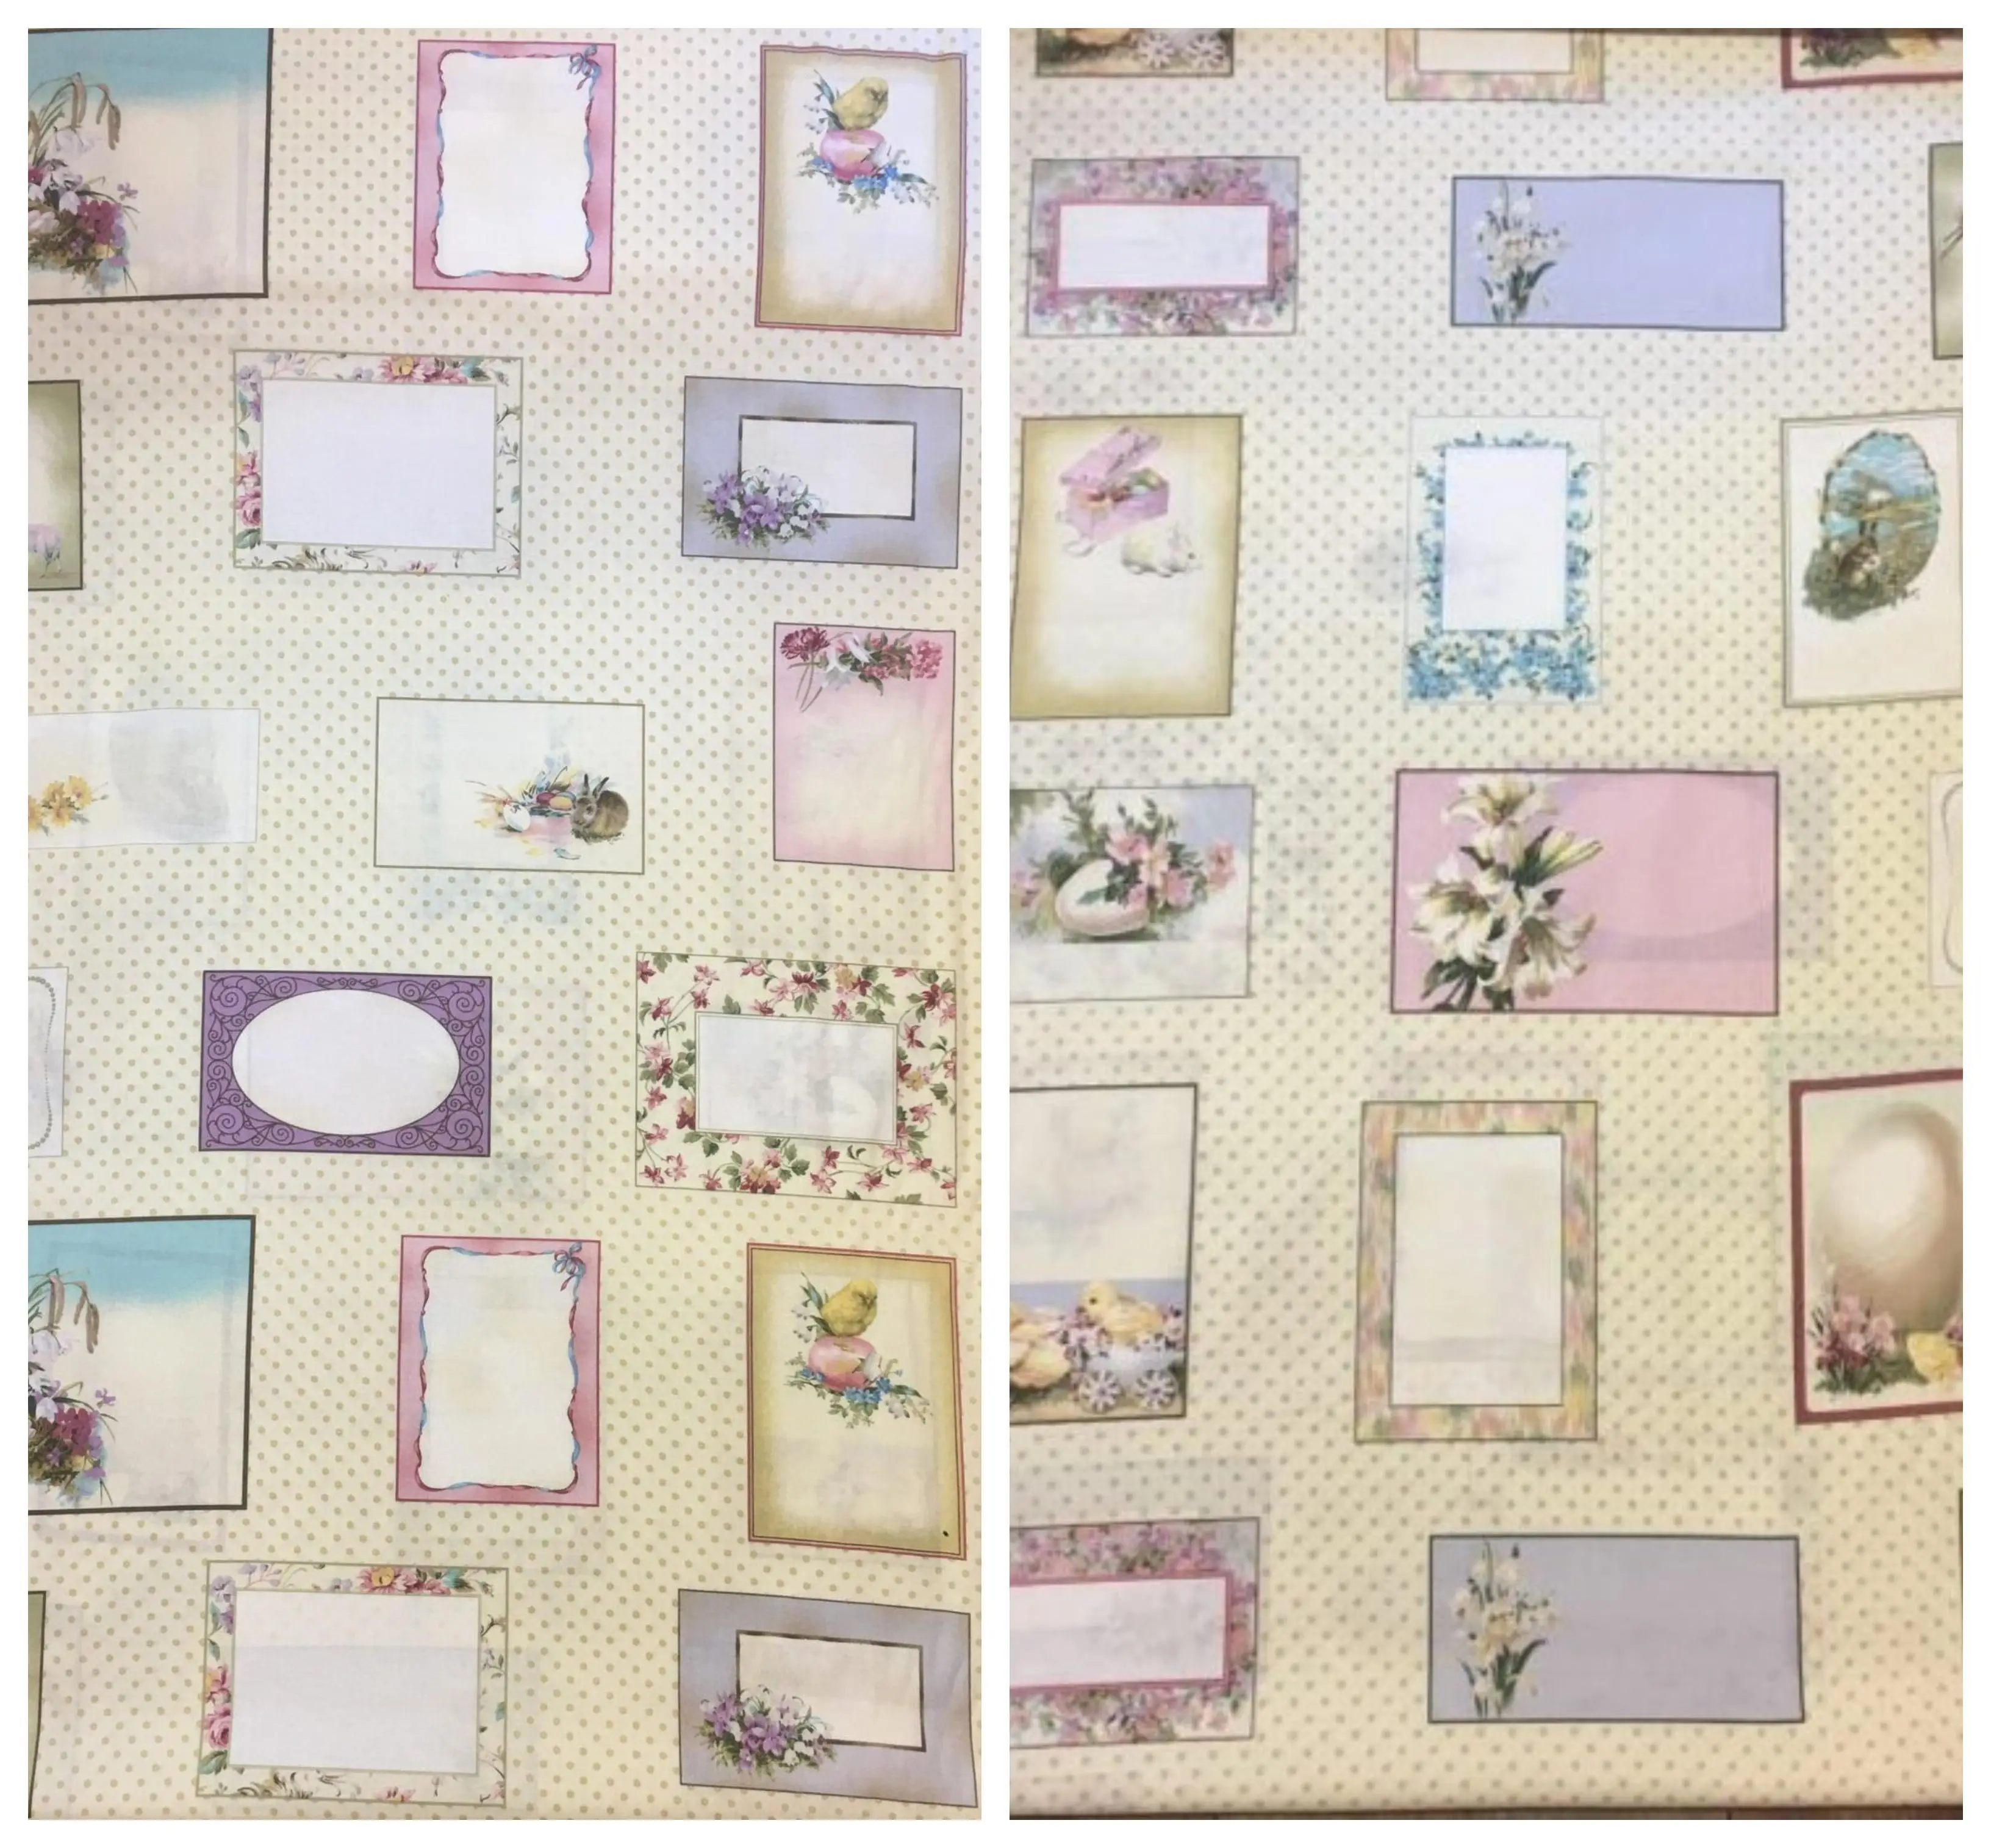 Occasions Quilt Labels